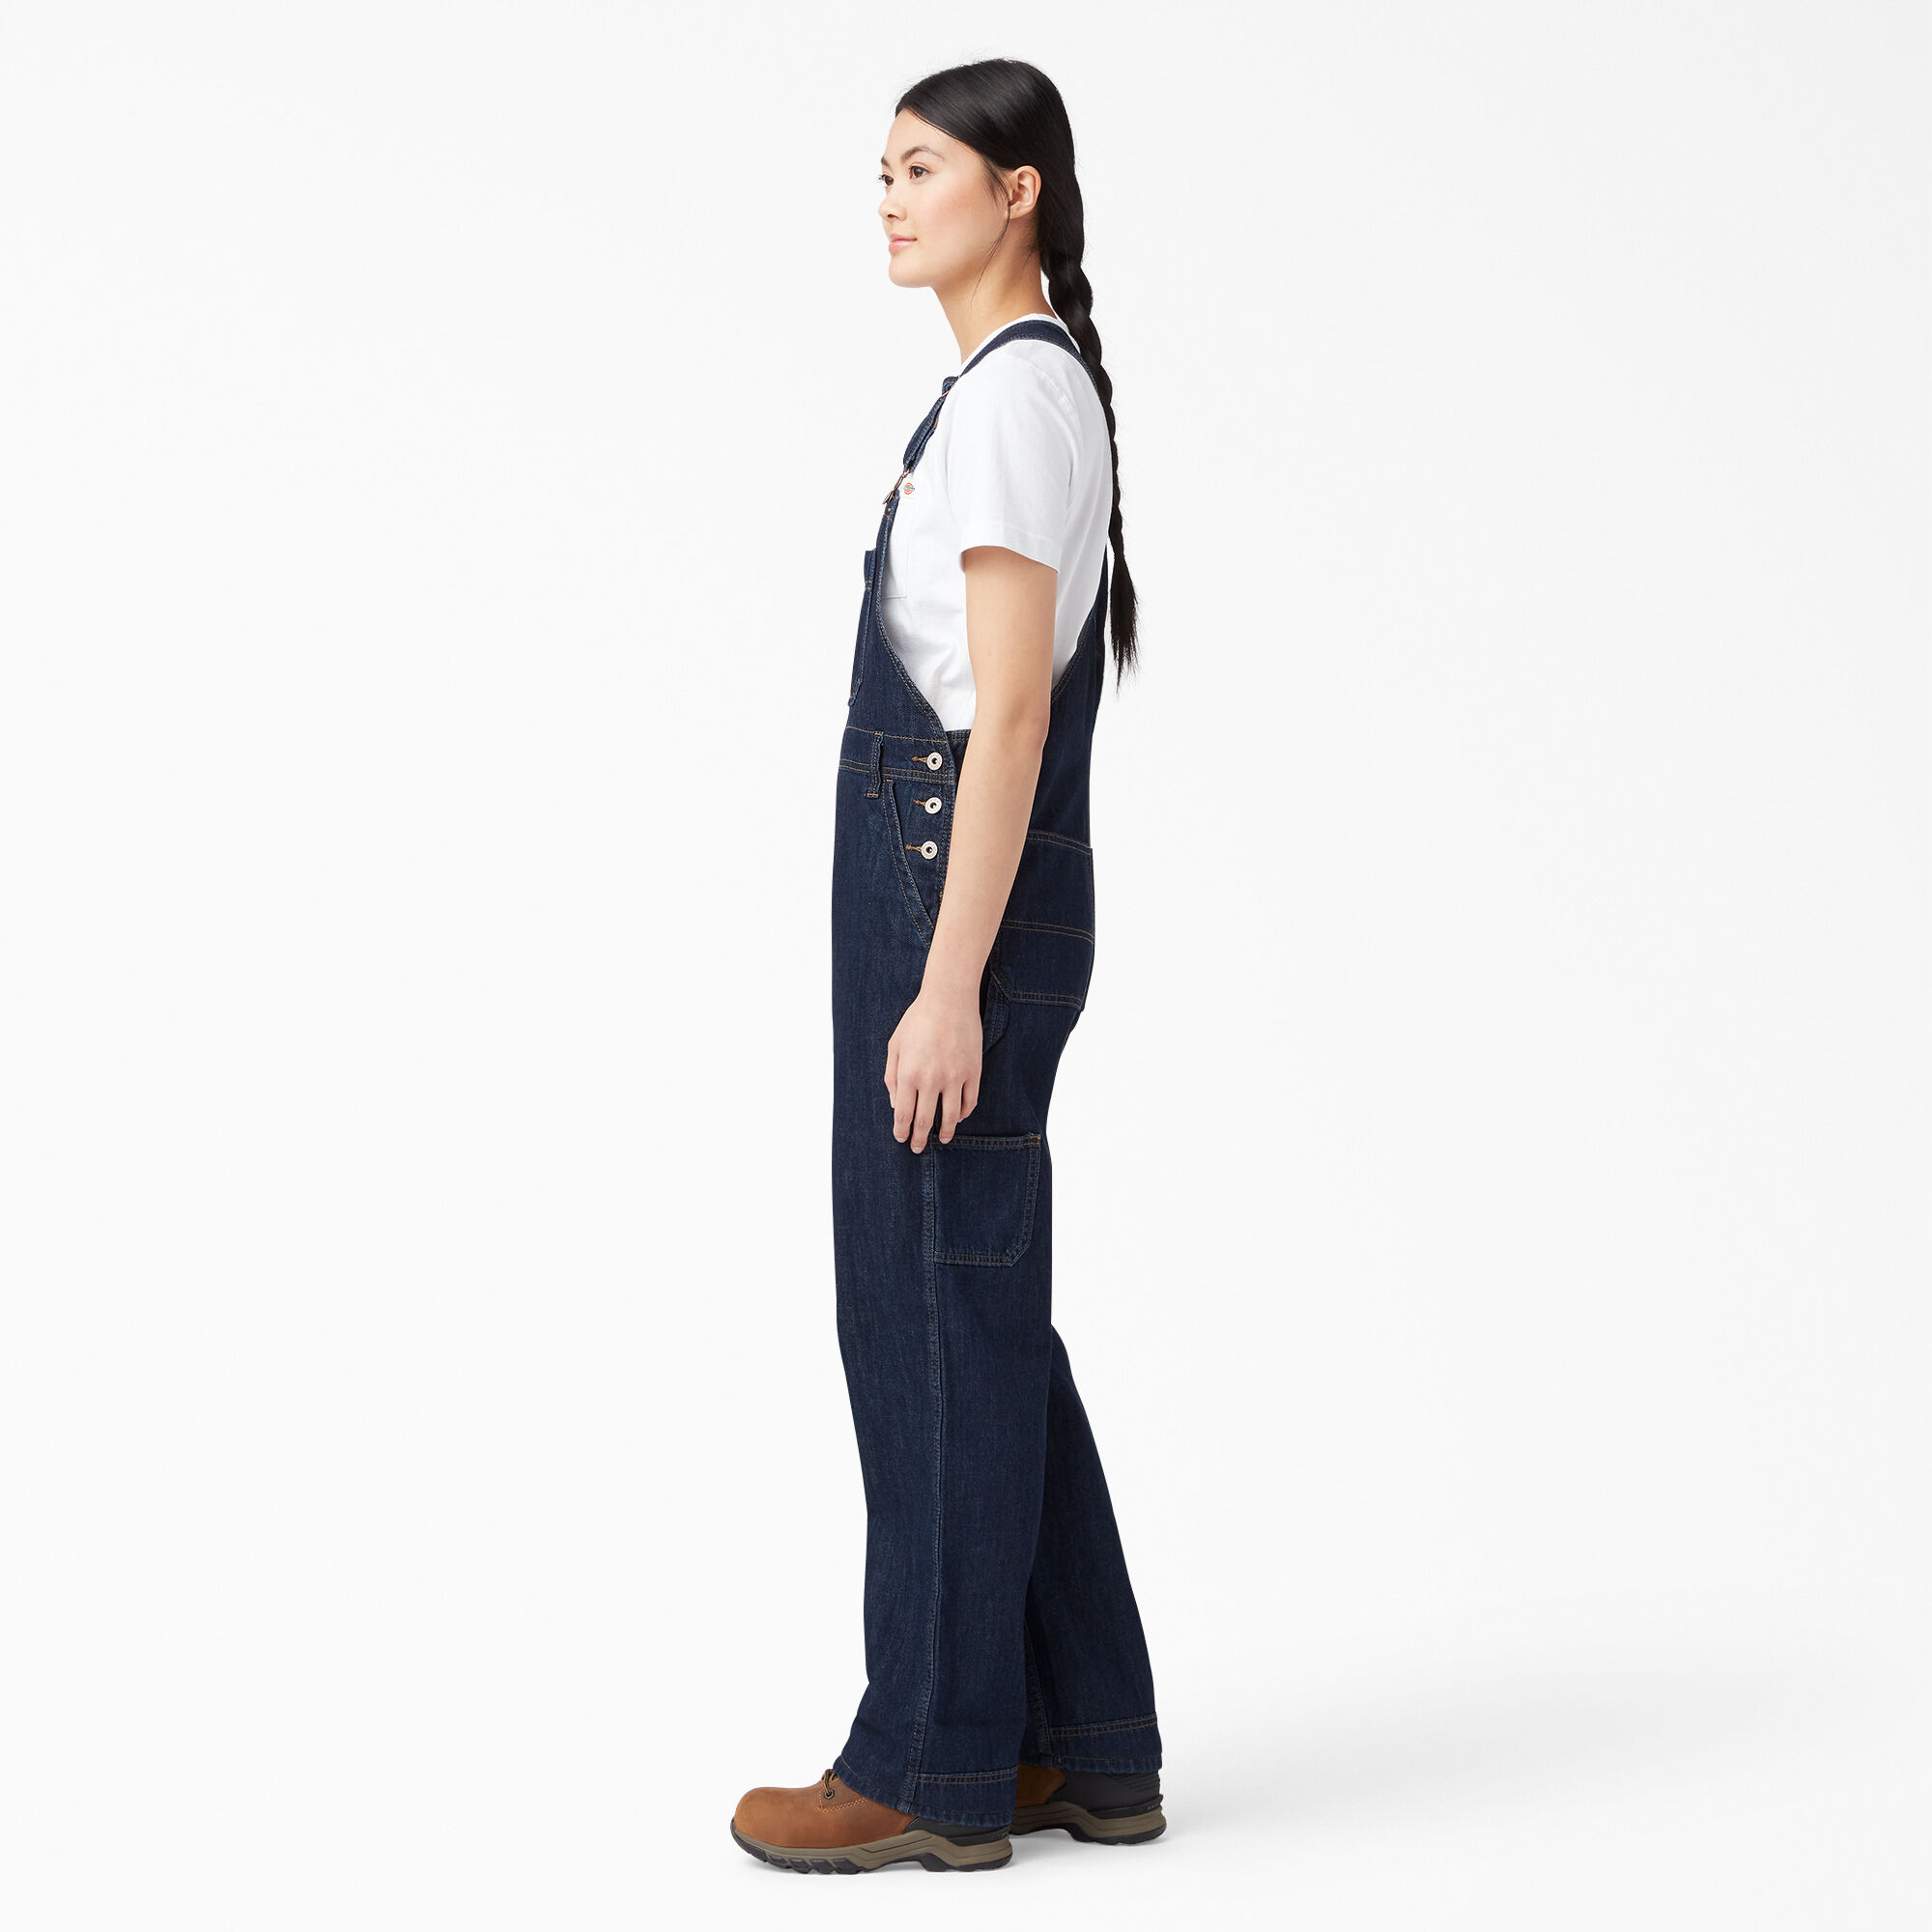 Dickies Womens Overalls Size Chart